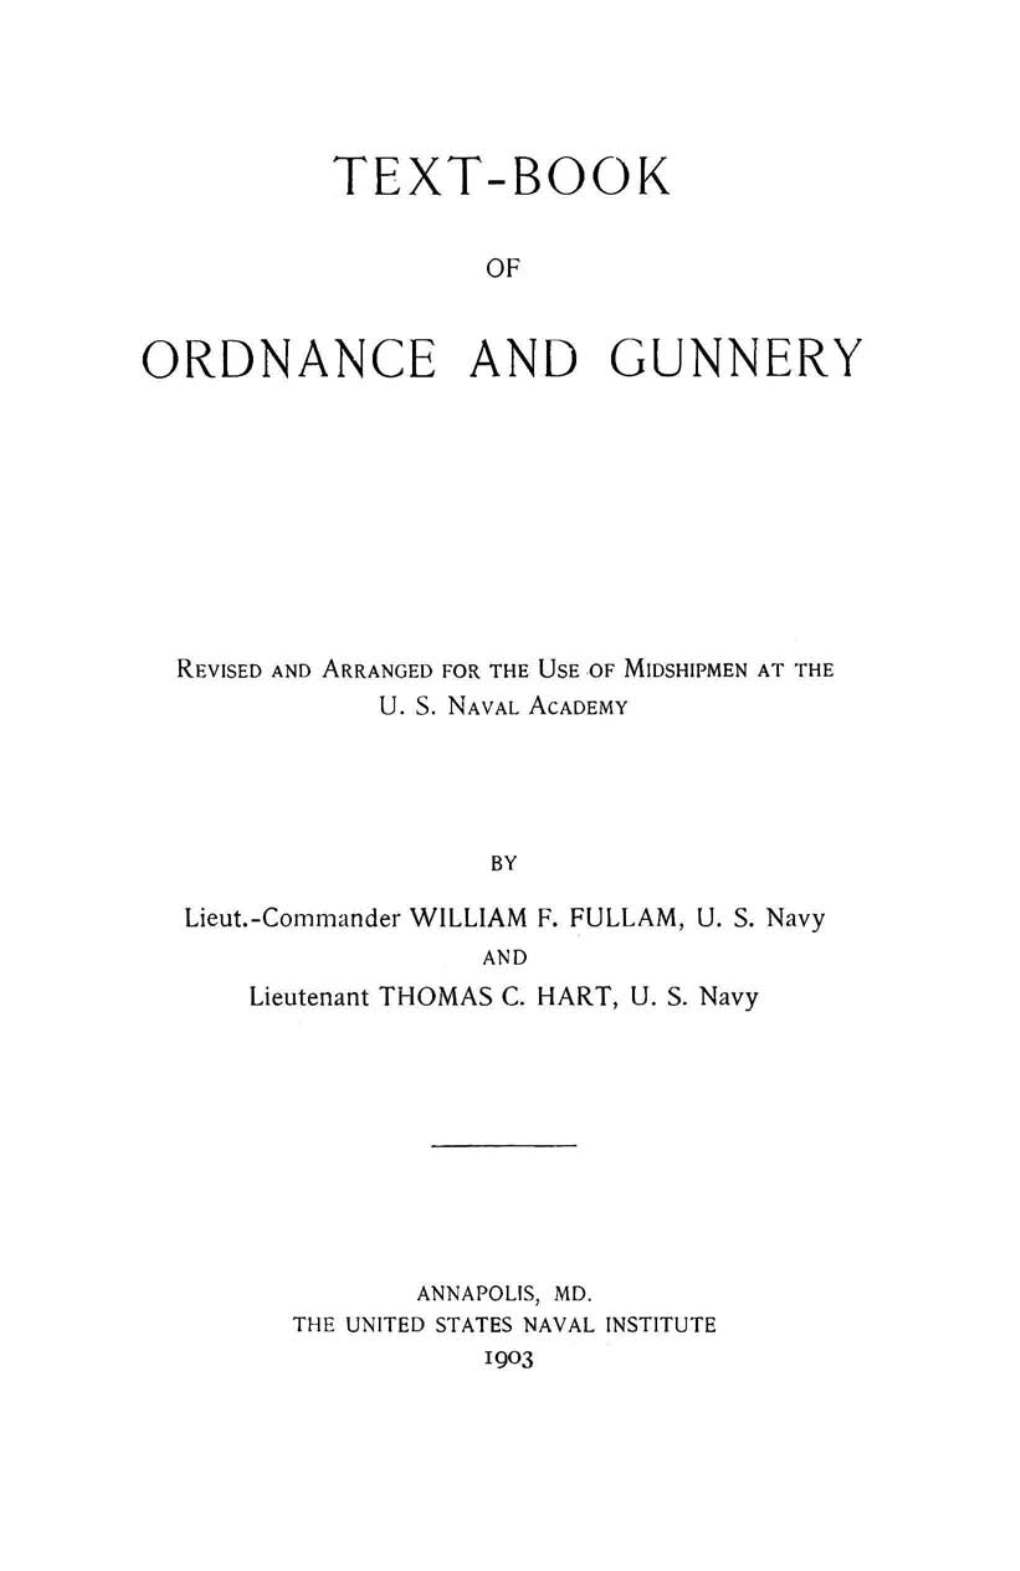 Text-Book Ordnance and Gunnery